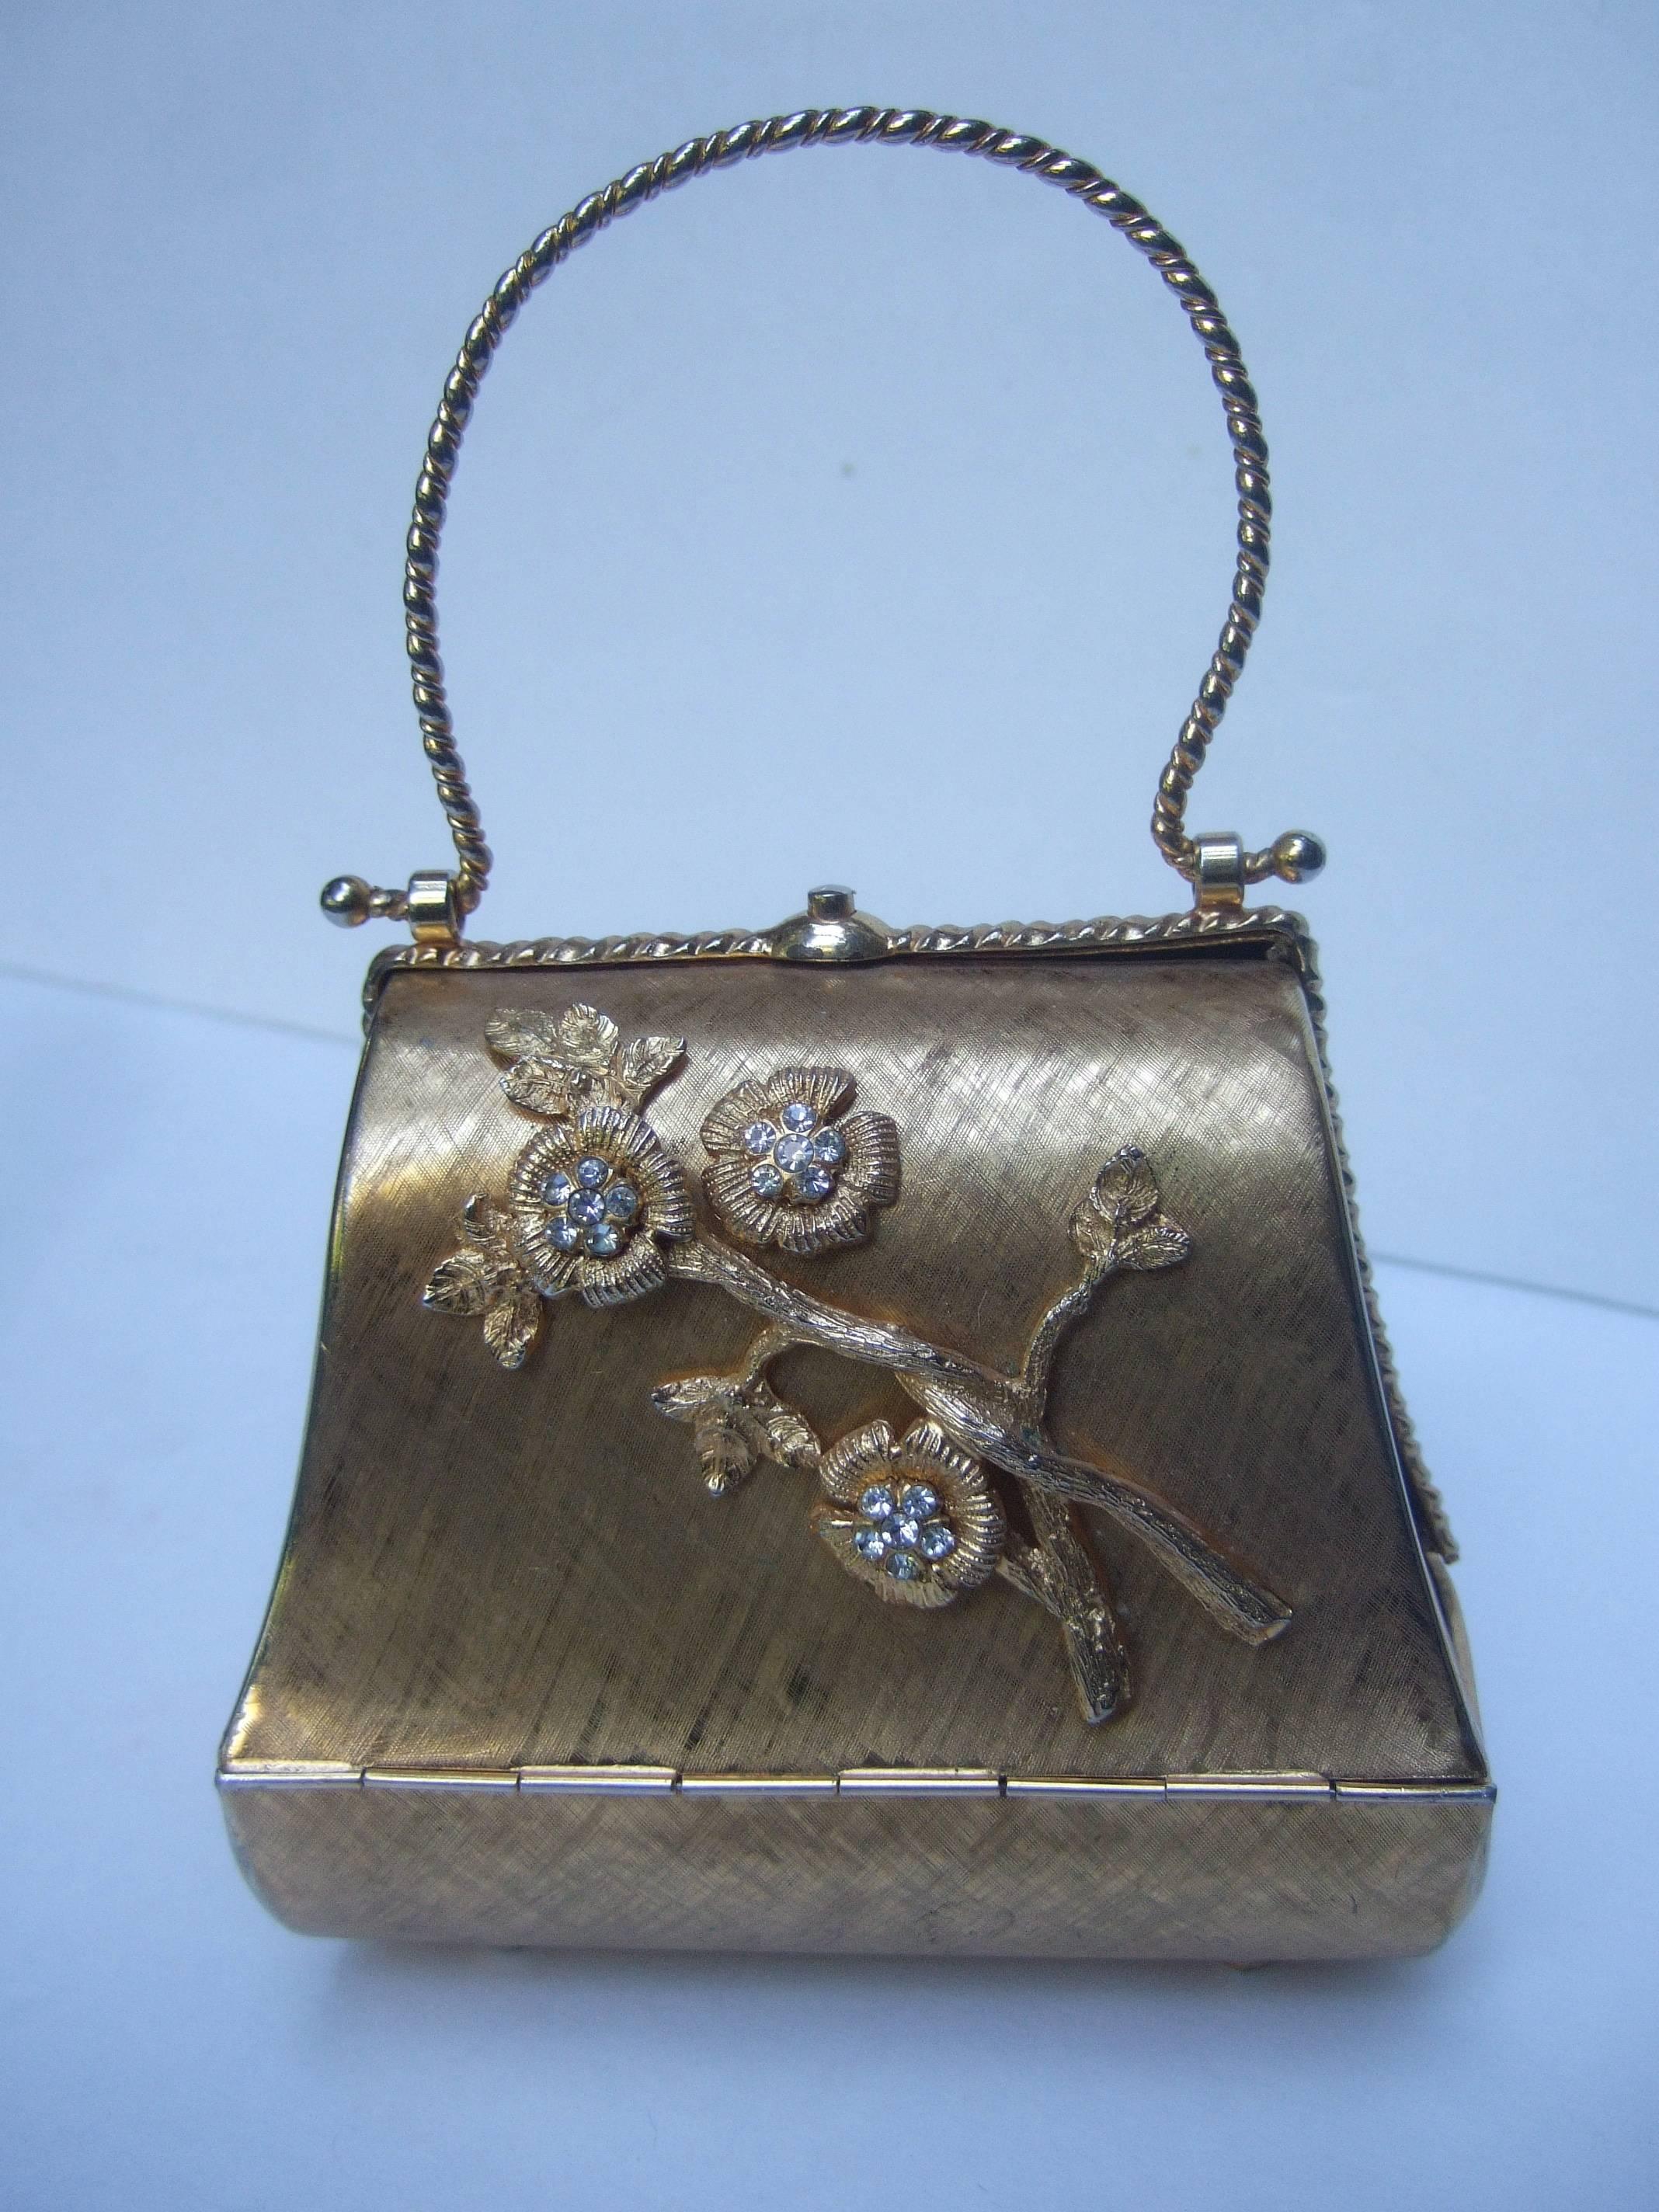 Opulent gilt metal jeweled flower evening bag c 1970
The elegant diminutive gold metal minaudiare  
purse is decorated with a branch of diamante 
crystal encrusted flowers

The small evening bag is carried with 
a gold braided metal swivel